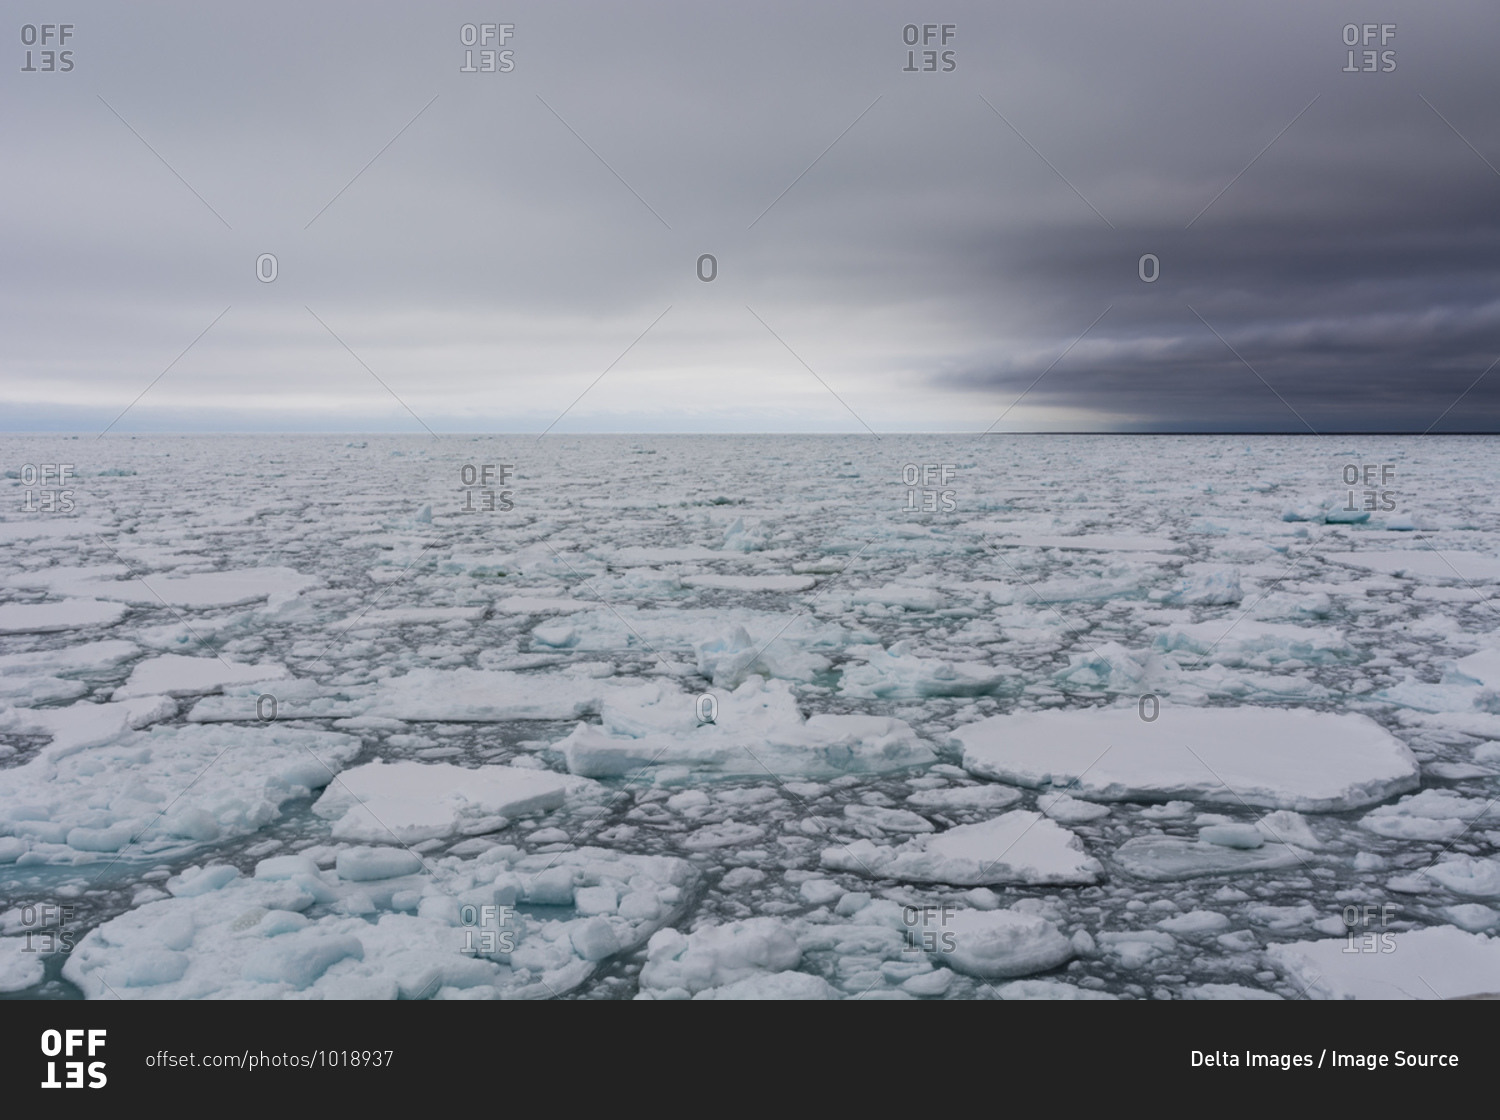 Floating pieces of pack ice, Polar Ice Cap, 81north of Spitsbergen, Norway